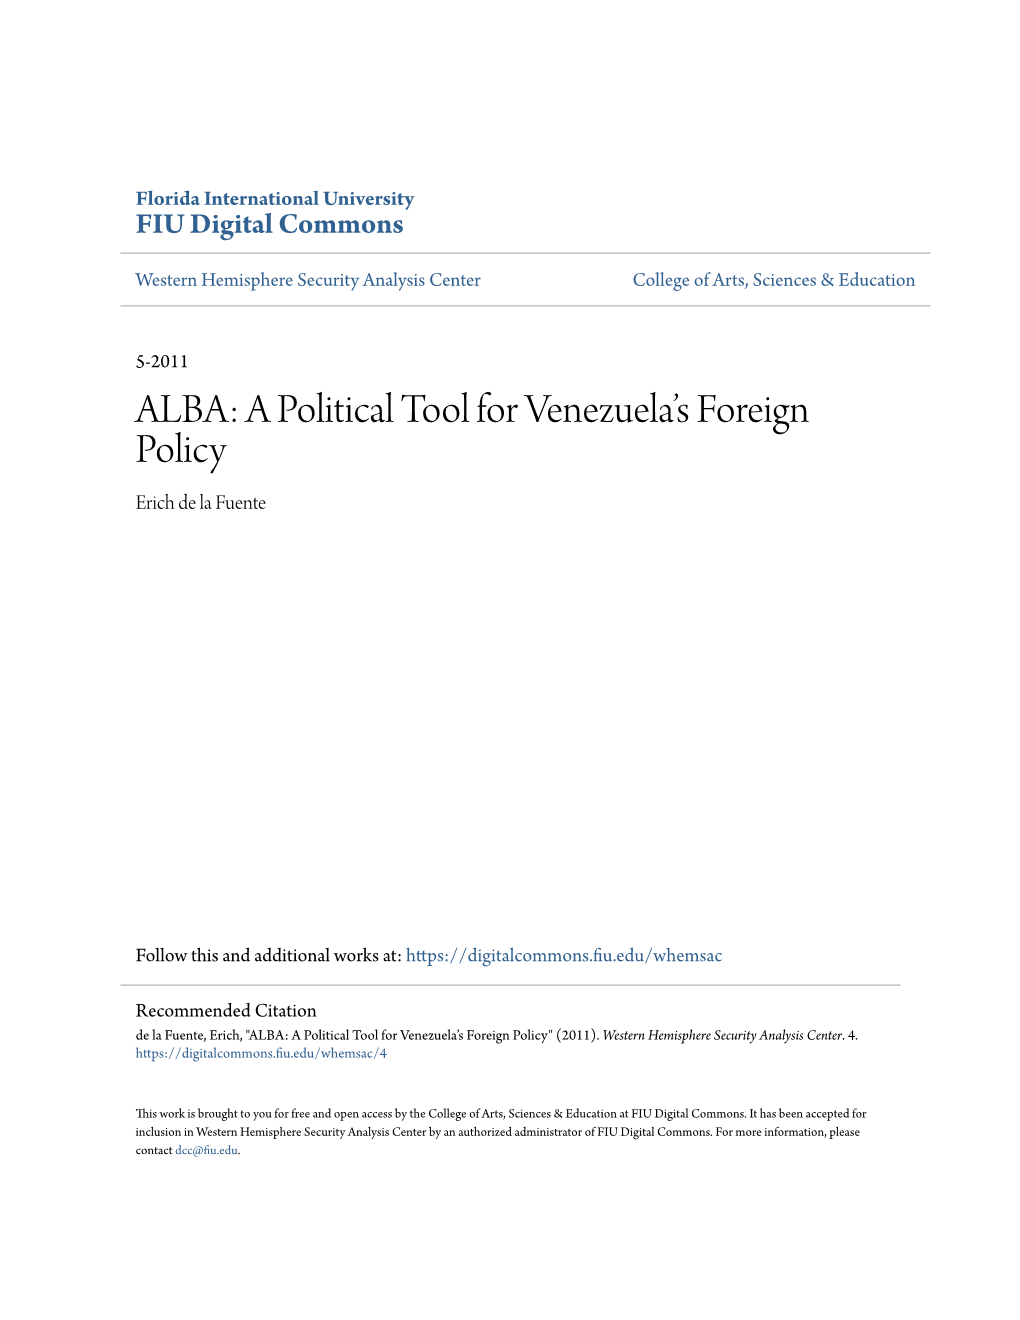 A Political Tool for Venezuela's Foreign Policy